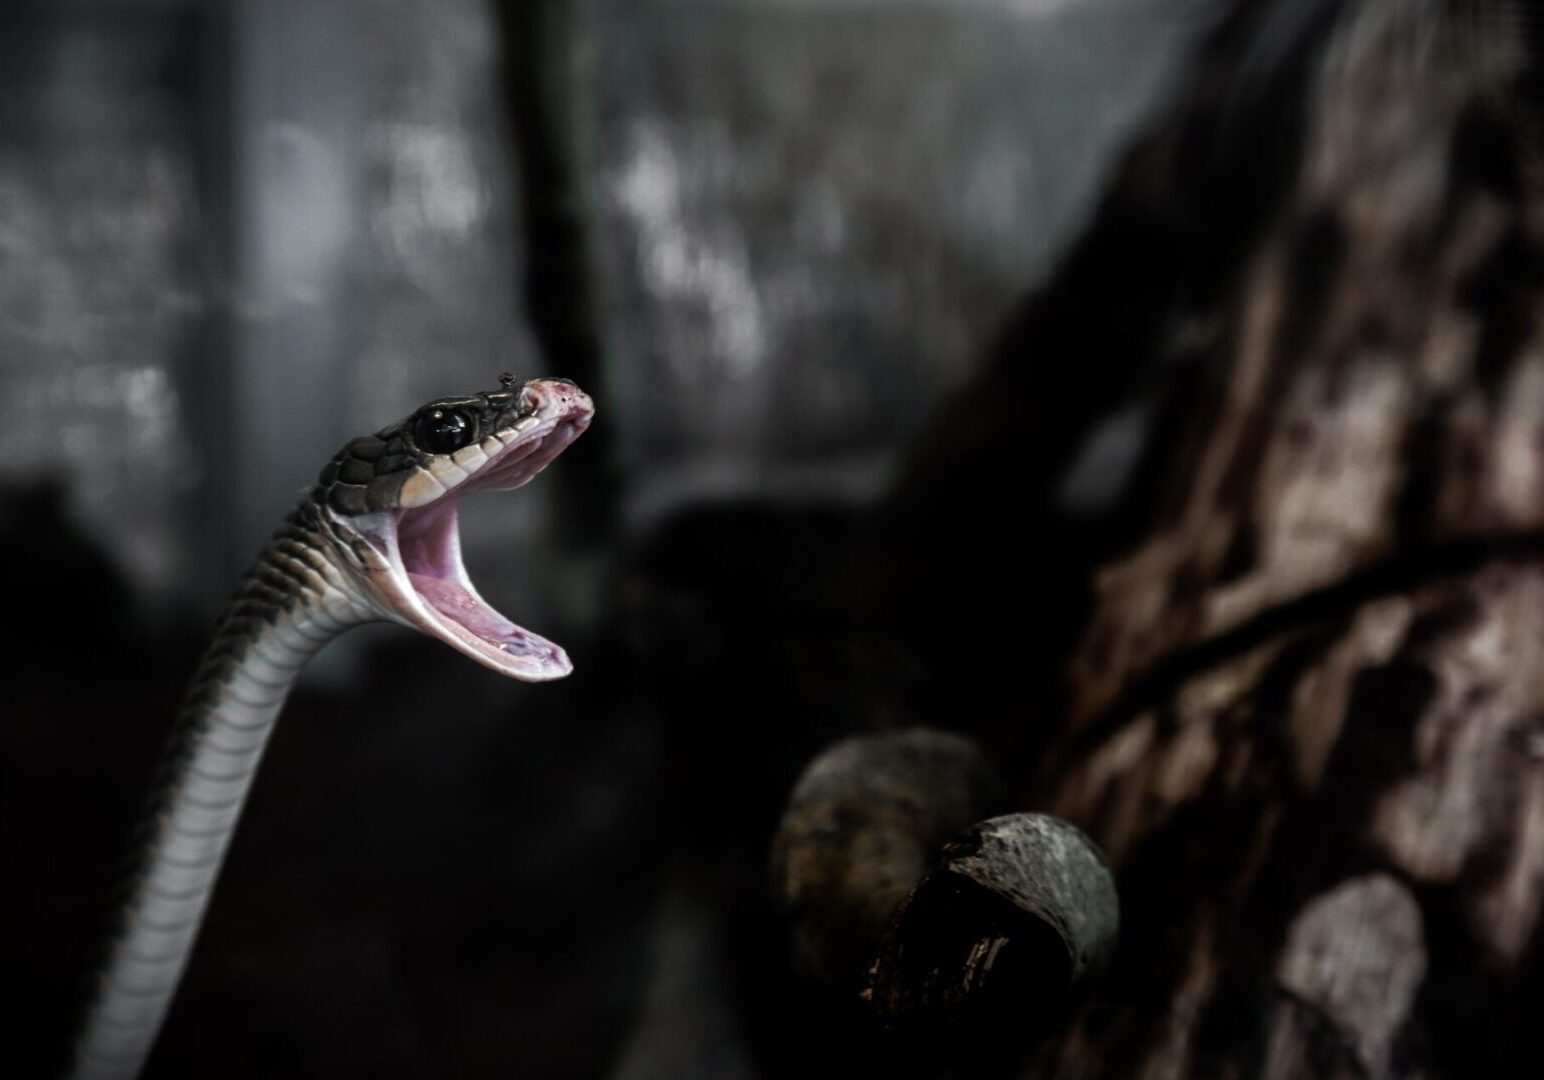 A snake with its mouth open and it's tongue hanging out.